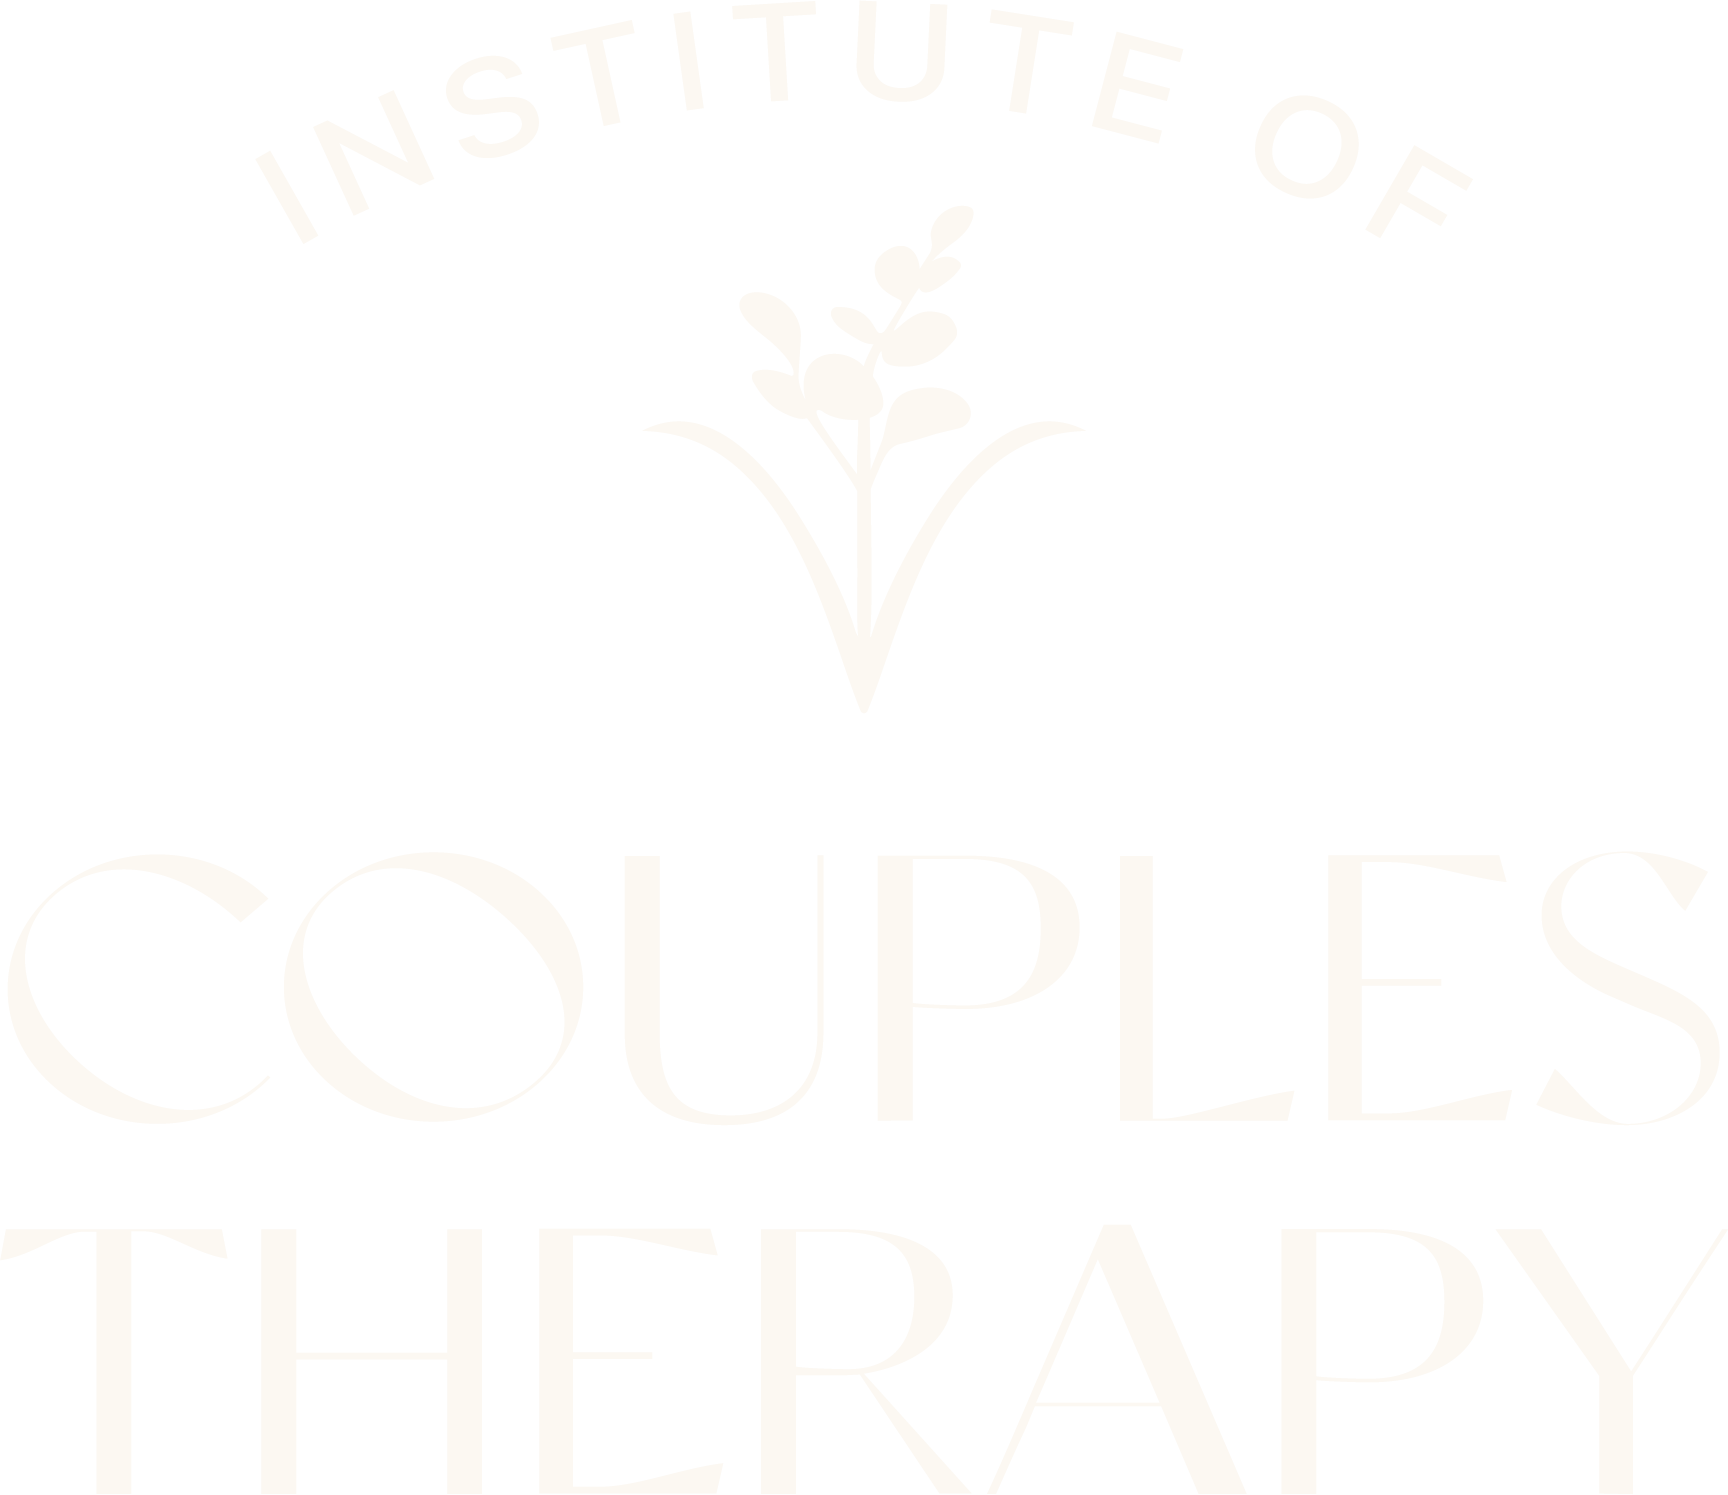 Institute of Couples Therapy